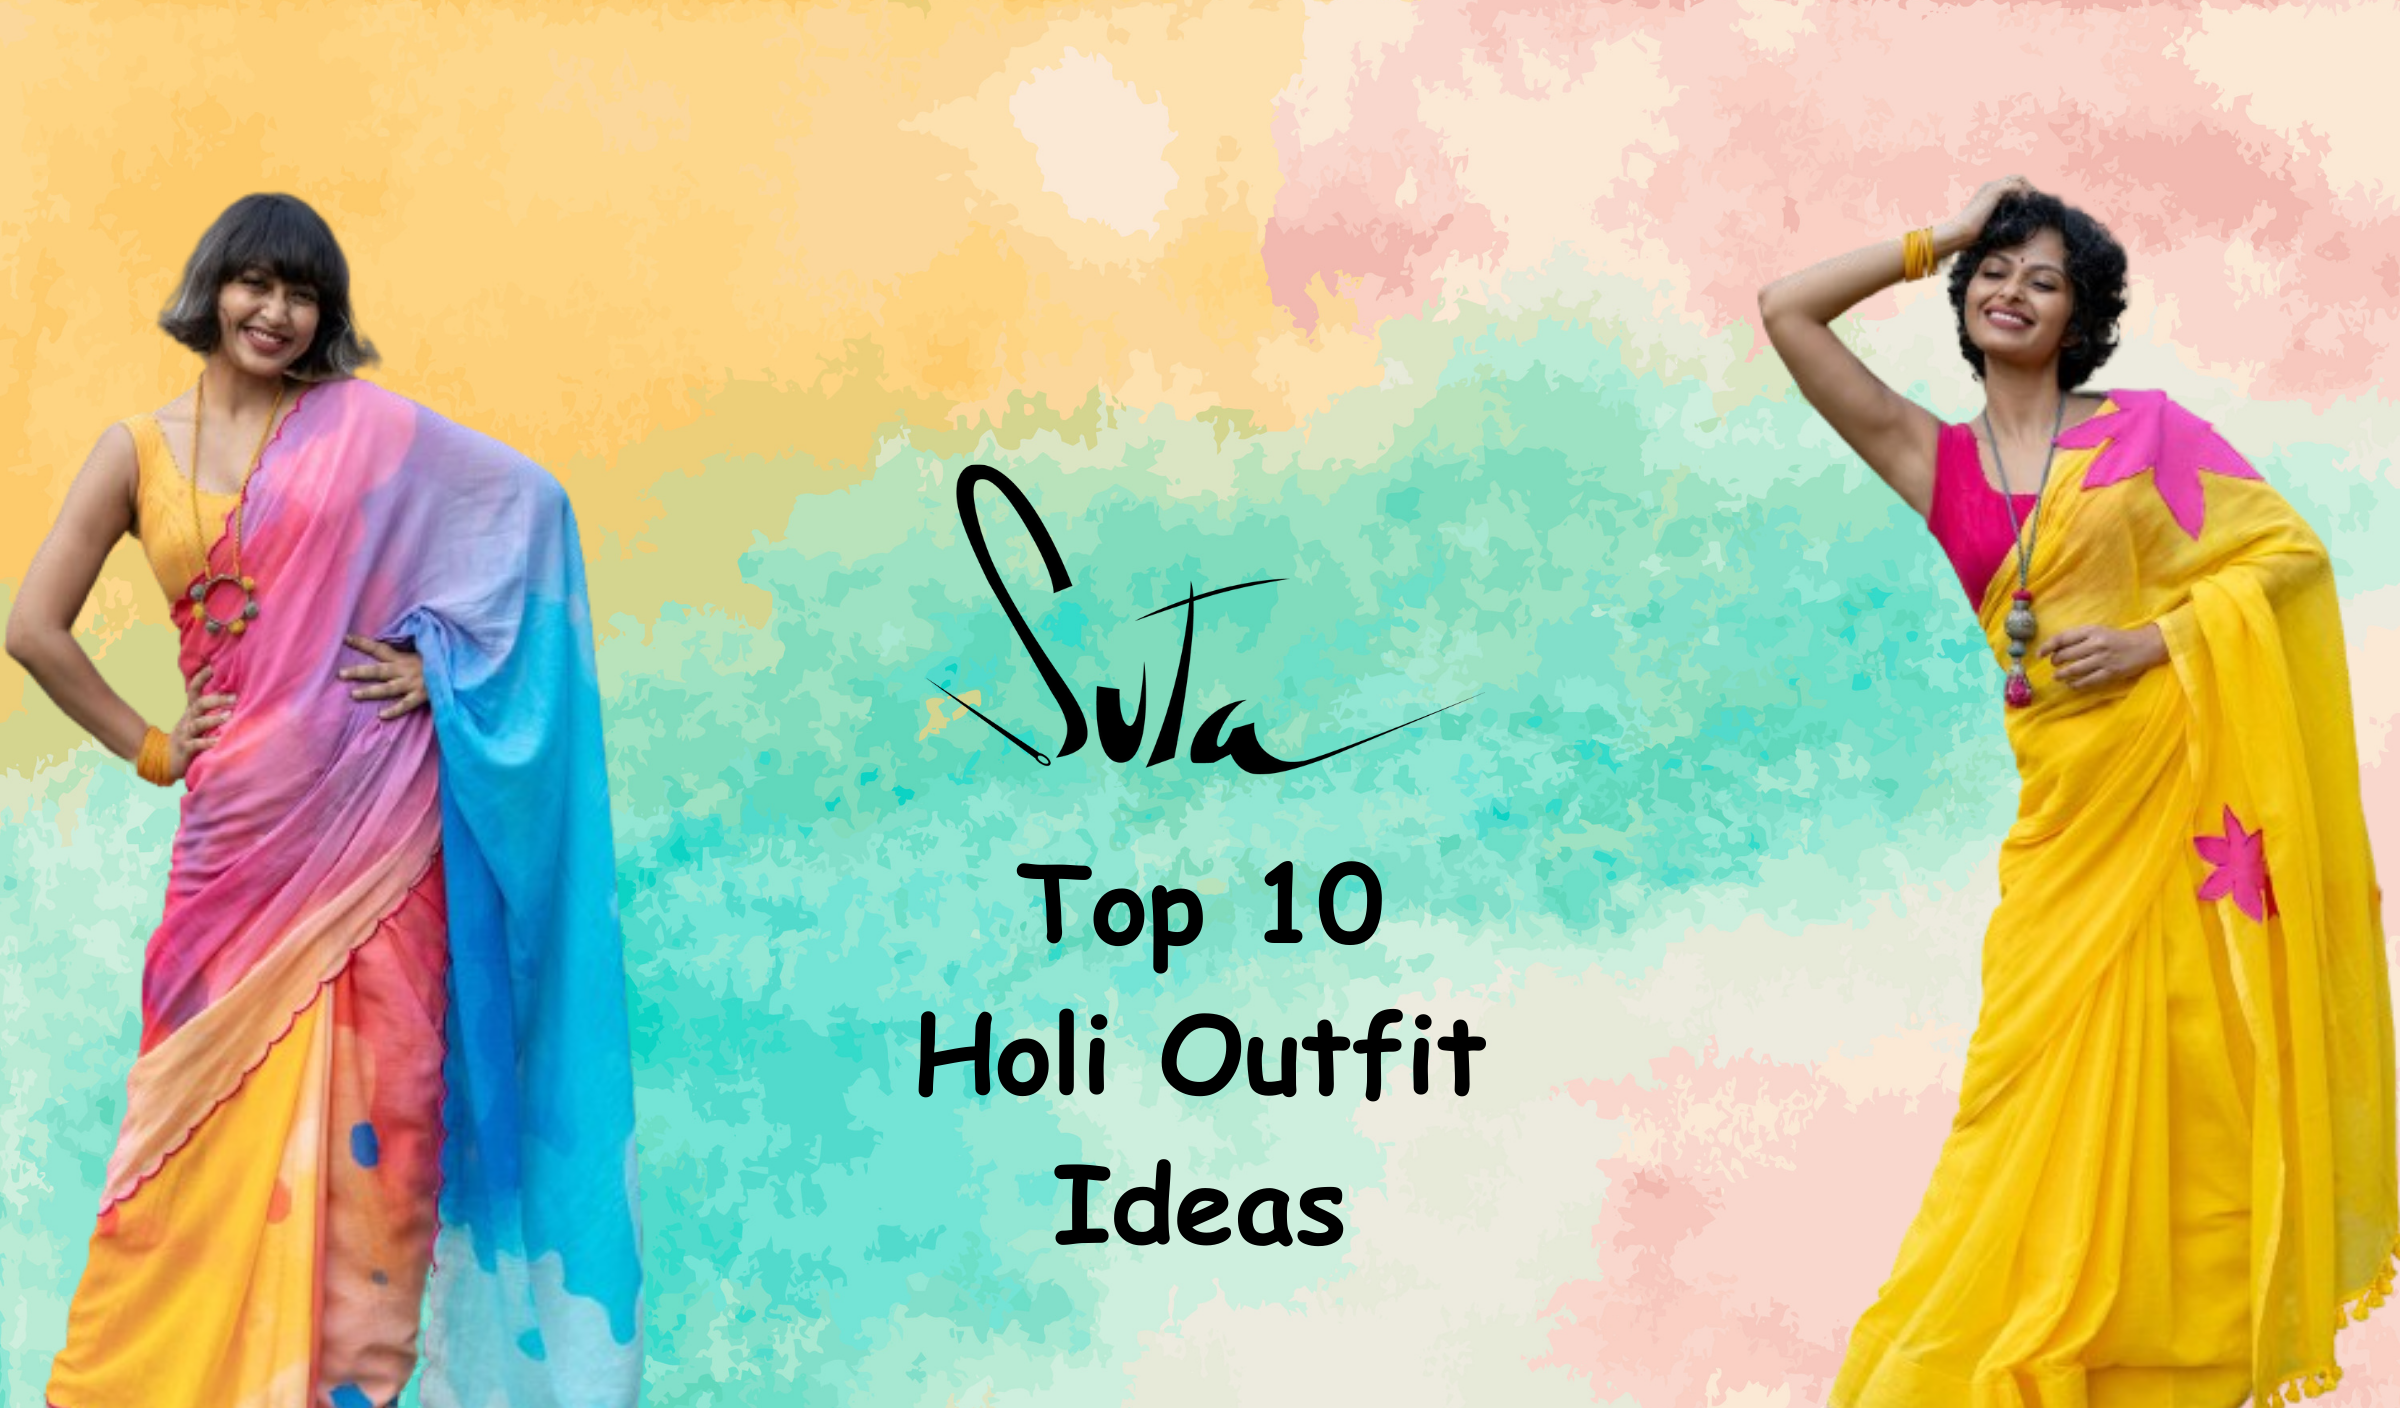 Celebrate Holi in Style: Top 10 Holi Outfit Ideas from Suta to Add Color to Your Wardrobe